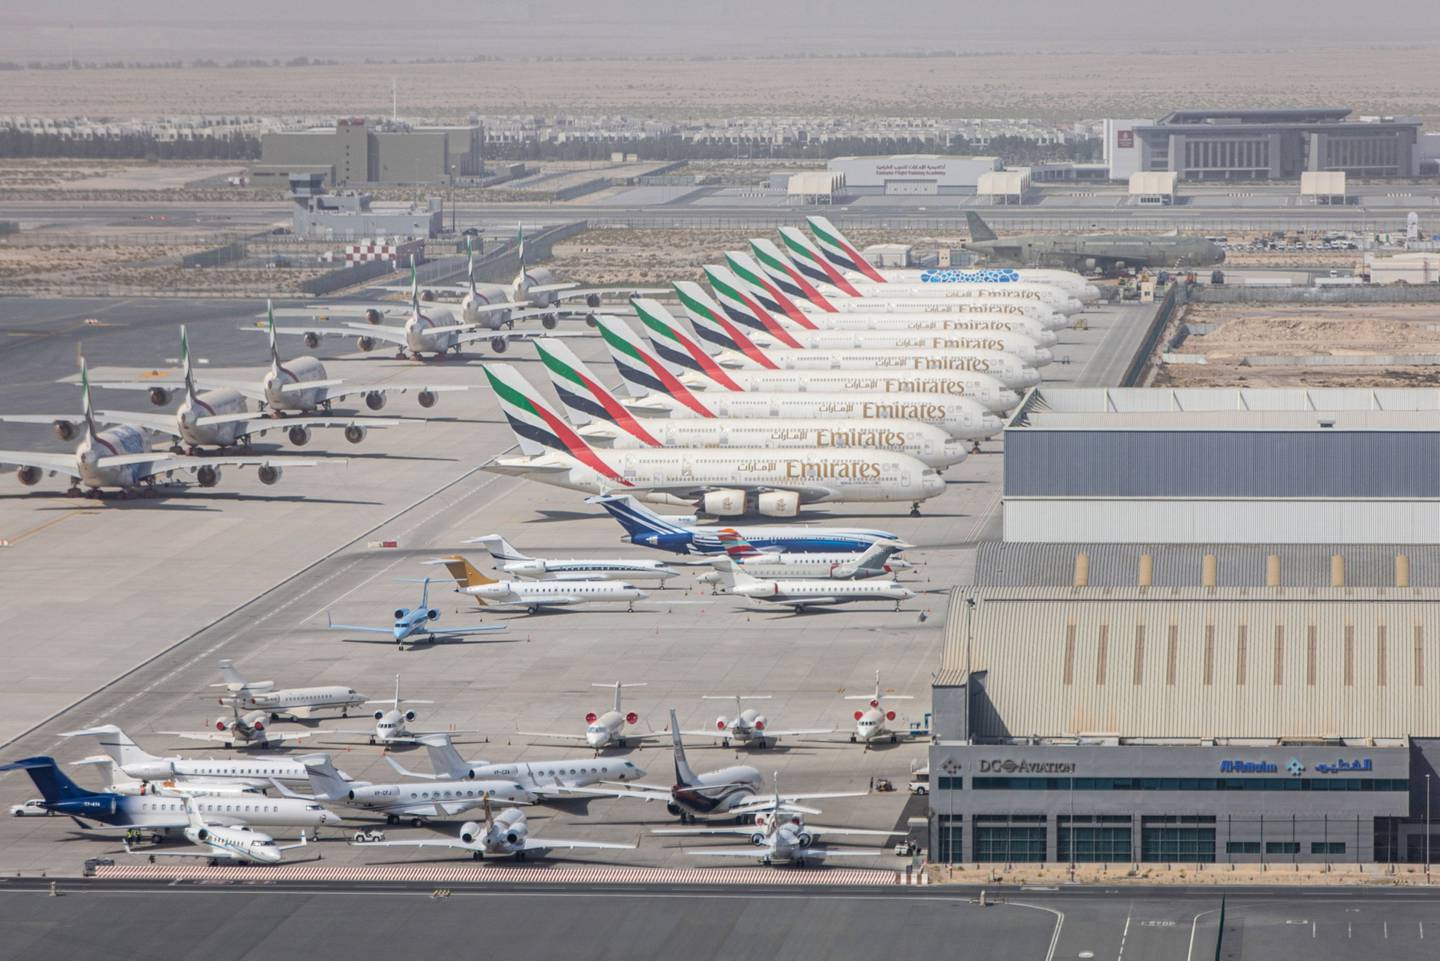 Emirates aircraft on the tarmac in Dubai. Bloomberg